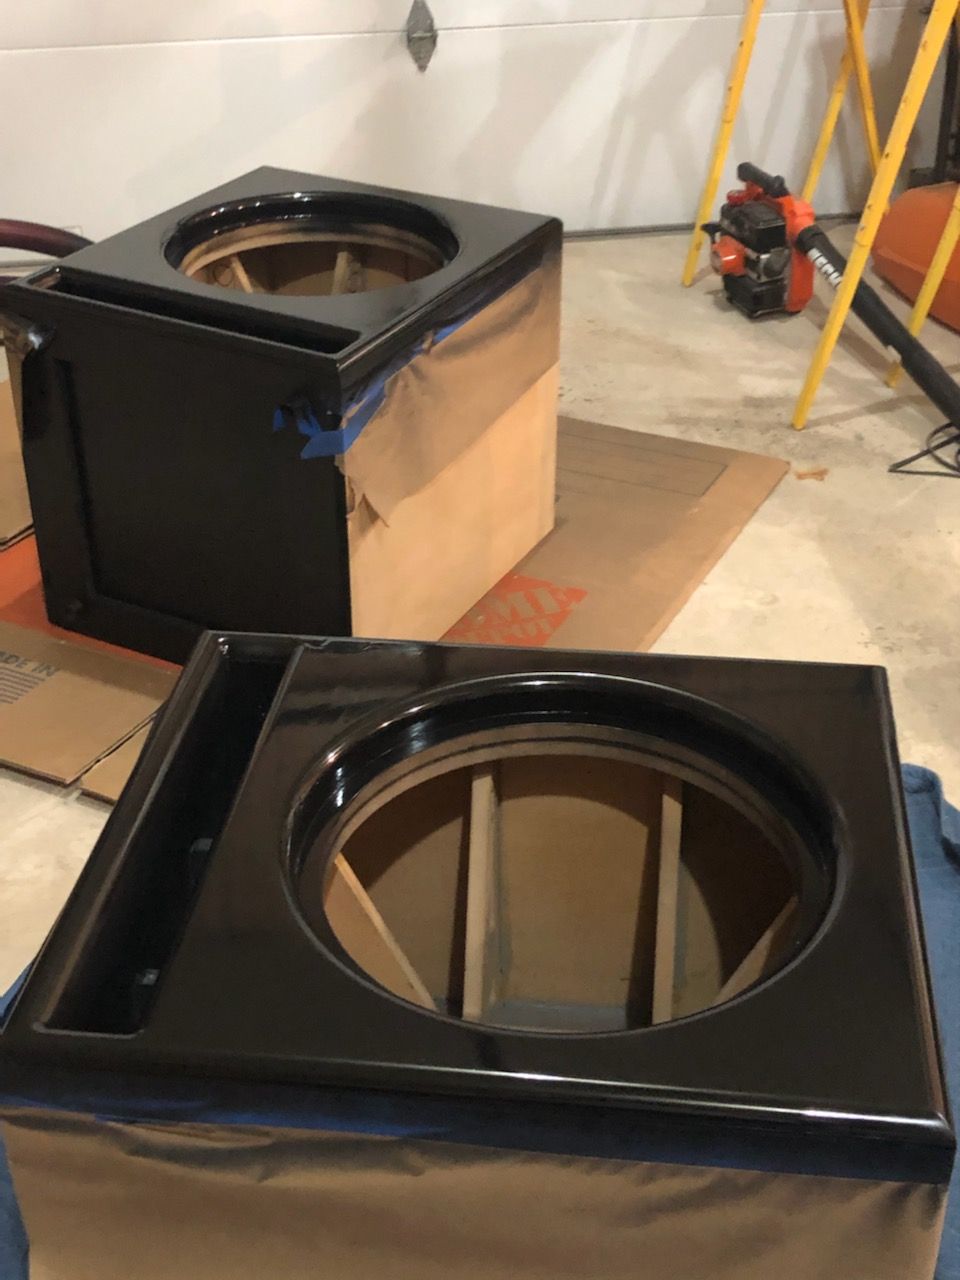 fronts with lots of sealer and finish coats of semi-gloss Rustoleum. Ready to put matt black Formica of the three sides, then mount subs.